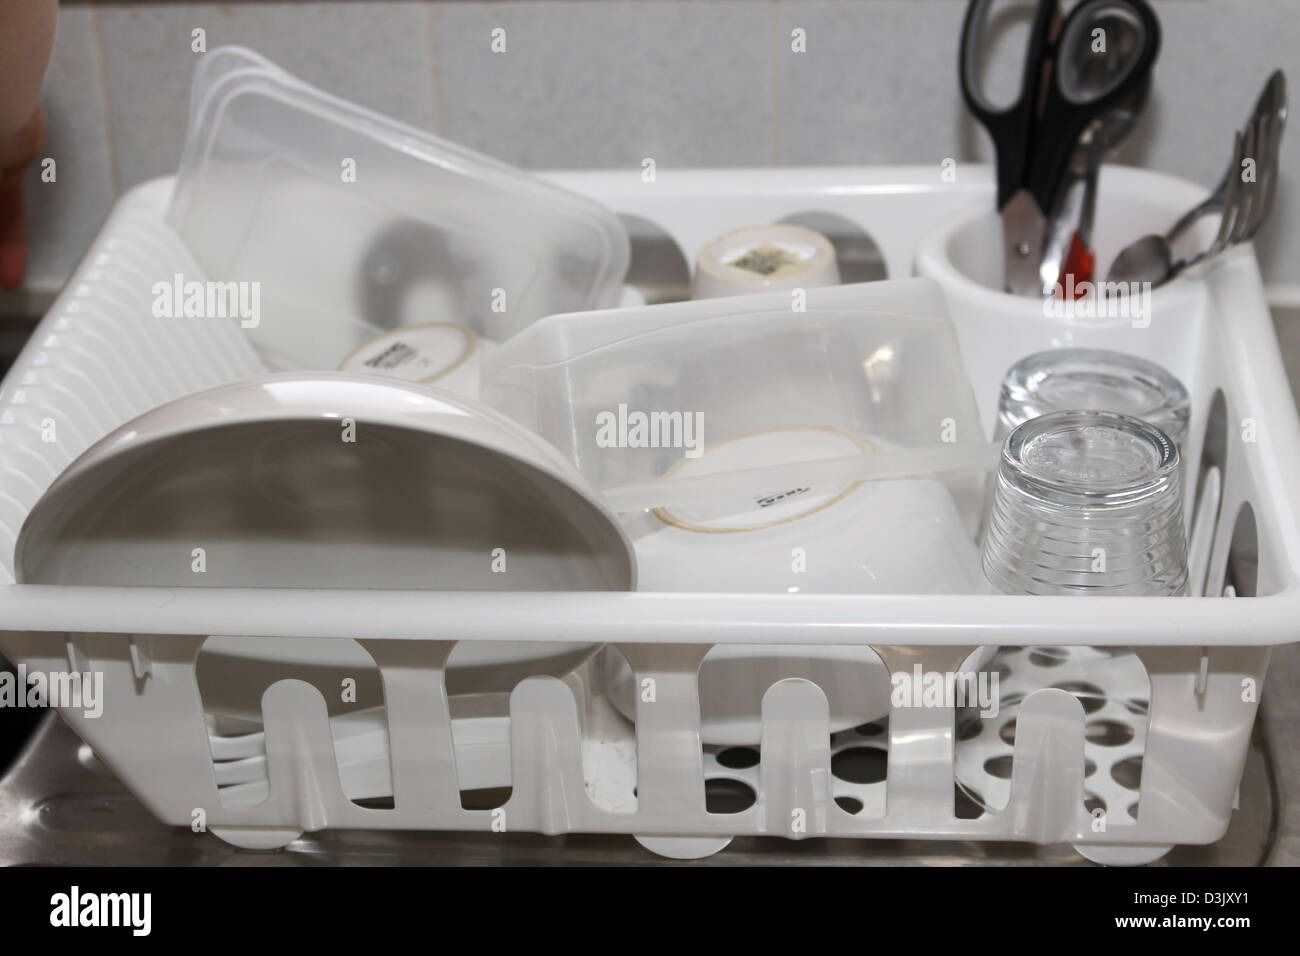 https://c8.alamy.com/comp/D3JXY1/dishes-in-plastic-drying-rack-on-draining-board-D3JXY1.jpg